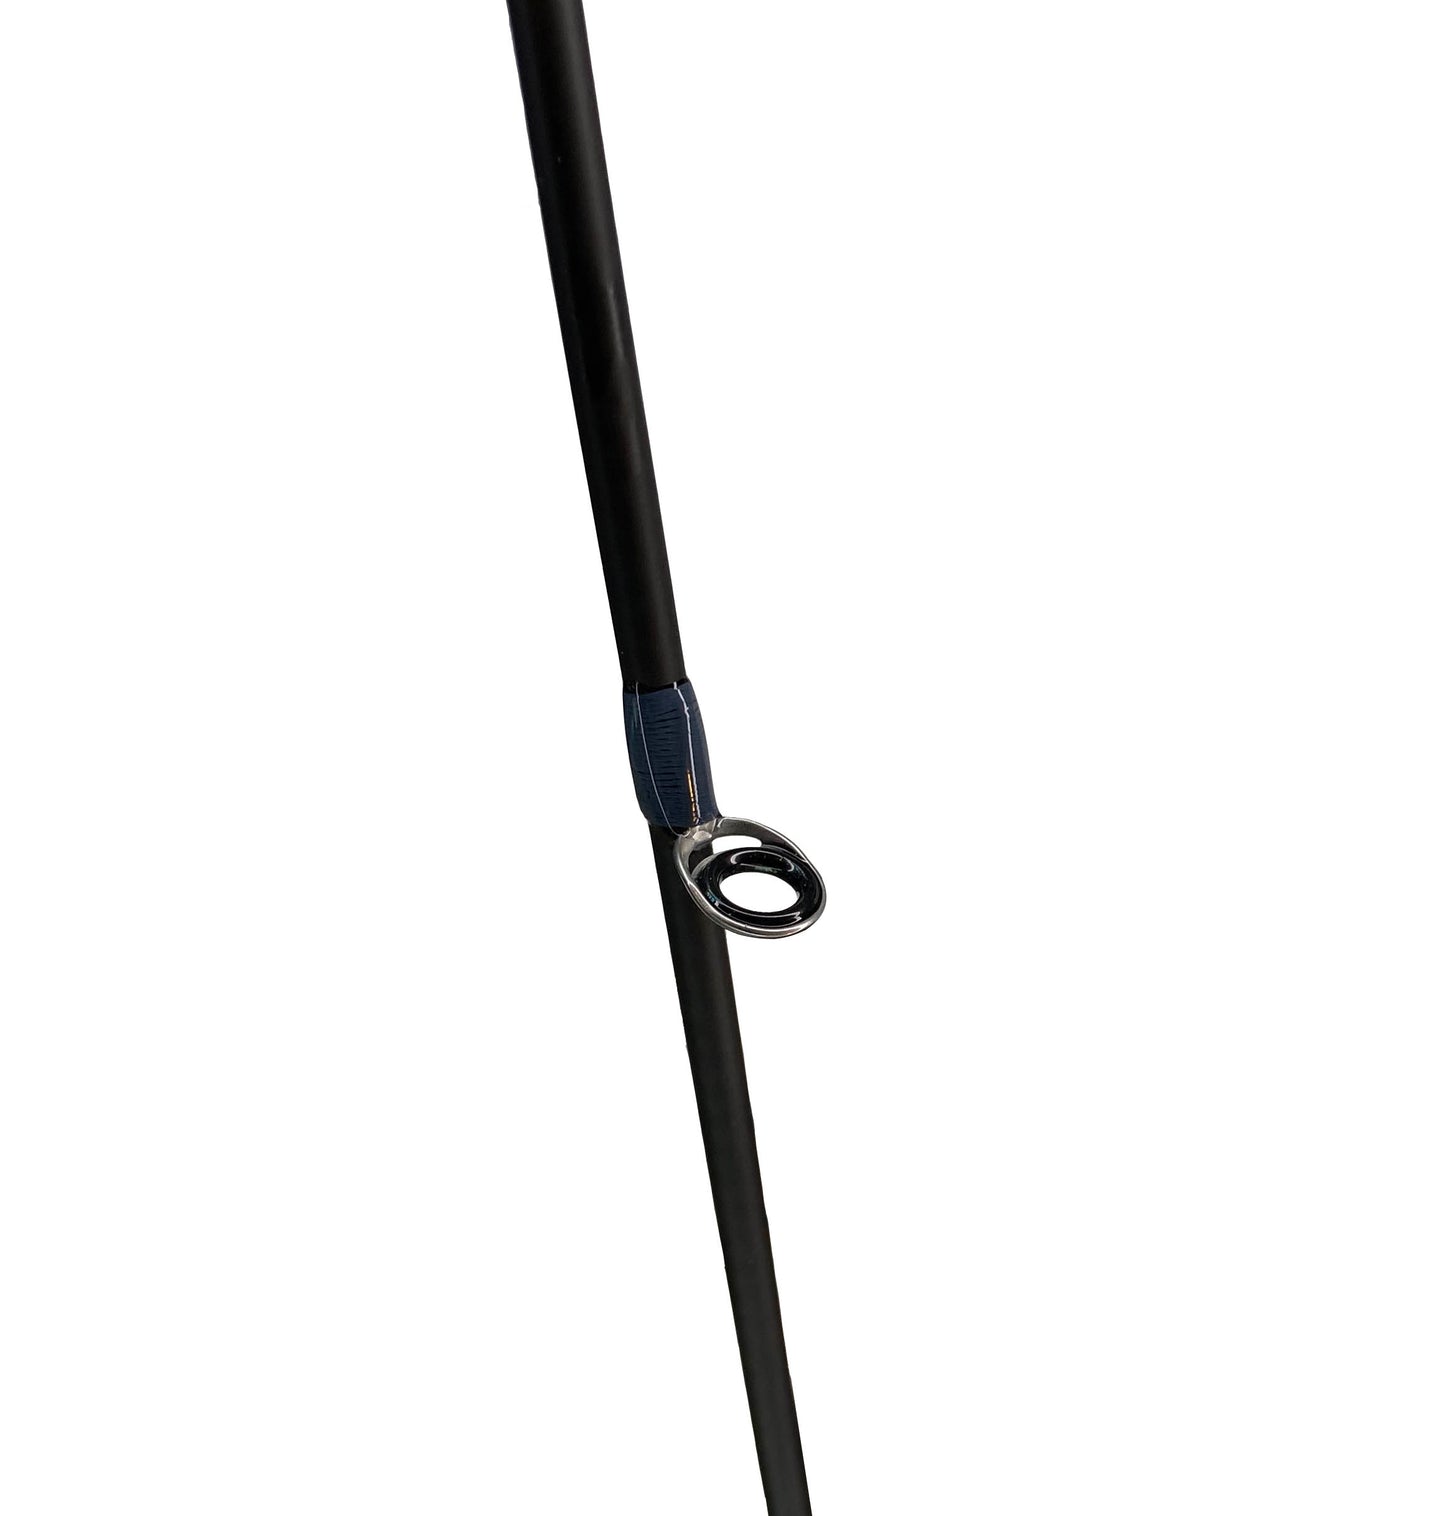 Tournament Series THE CHICKEN ROD - 7'6" Casting Heavy MF